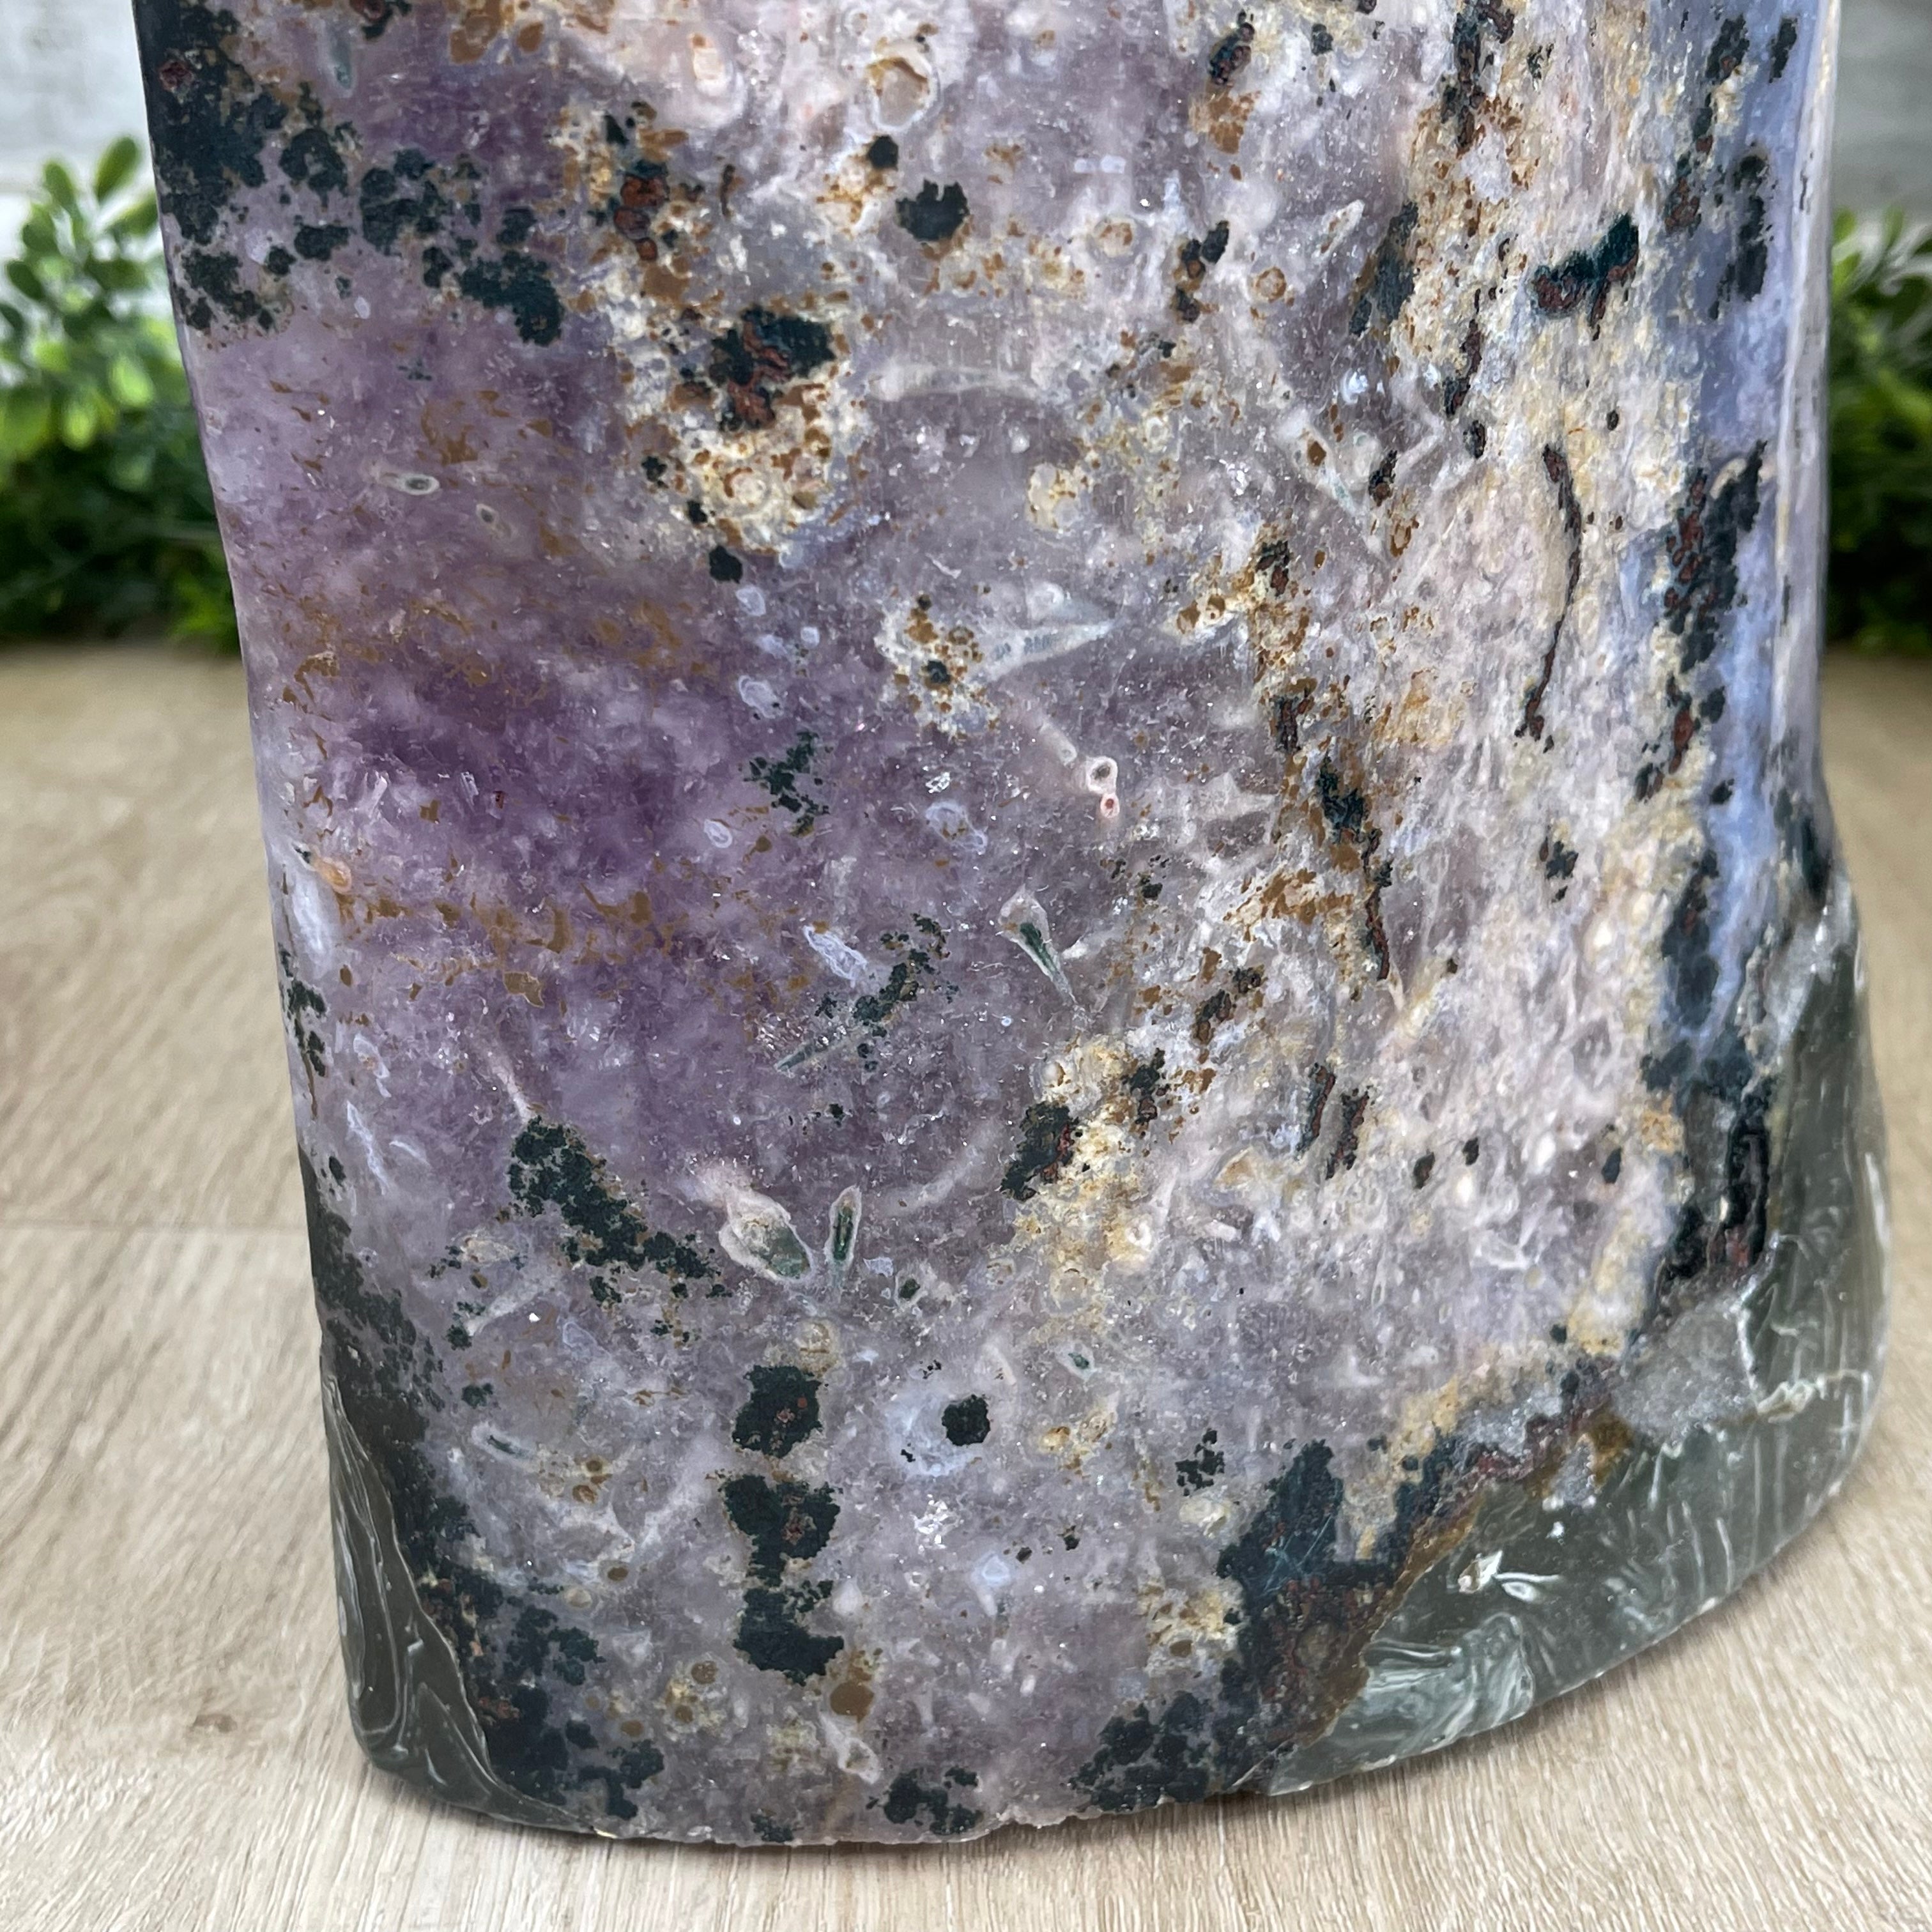 Large Extra Plus Quality Polished Brazilian Amethyst Cathedral, 155.3 lbs & 52” Tall Model #5602-0145 by Brazil Gems - Brazil GemsBrazil GemsLarge Extra Plus Quality Polished Brazilian Amethyst Cathedral, 155.3 lbs & 52” Tall Model #5602-0145 by Brazil GemsPolished Cathedrals5602-0145